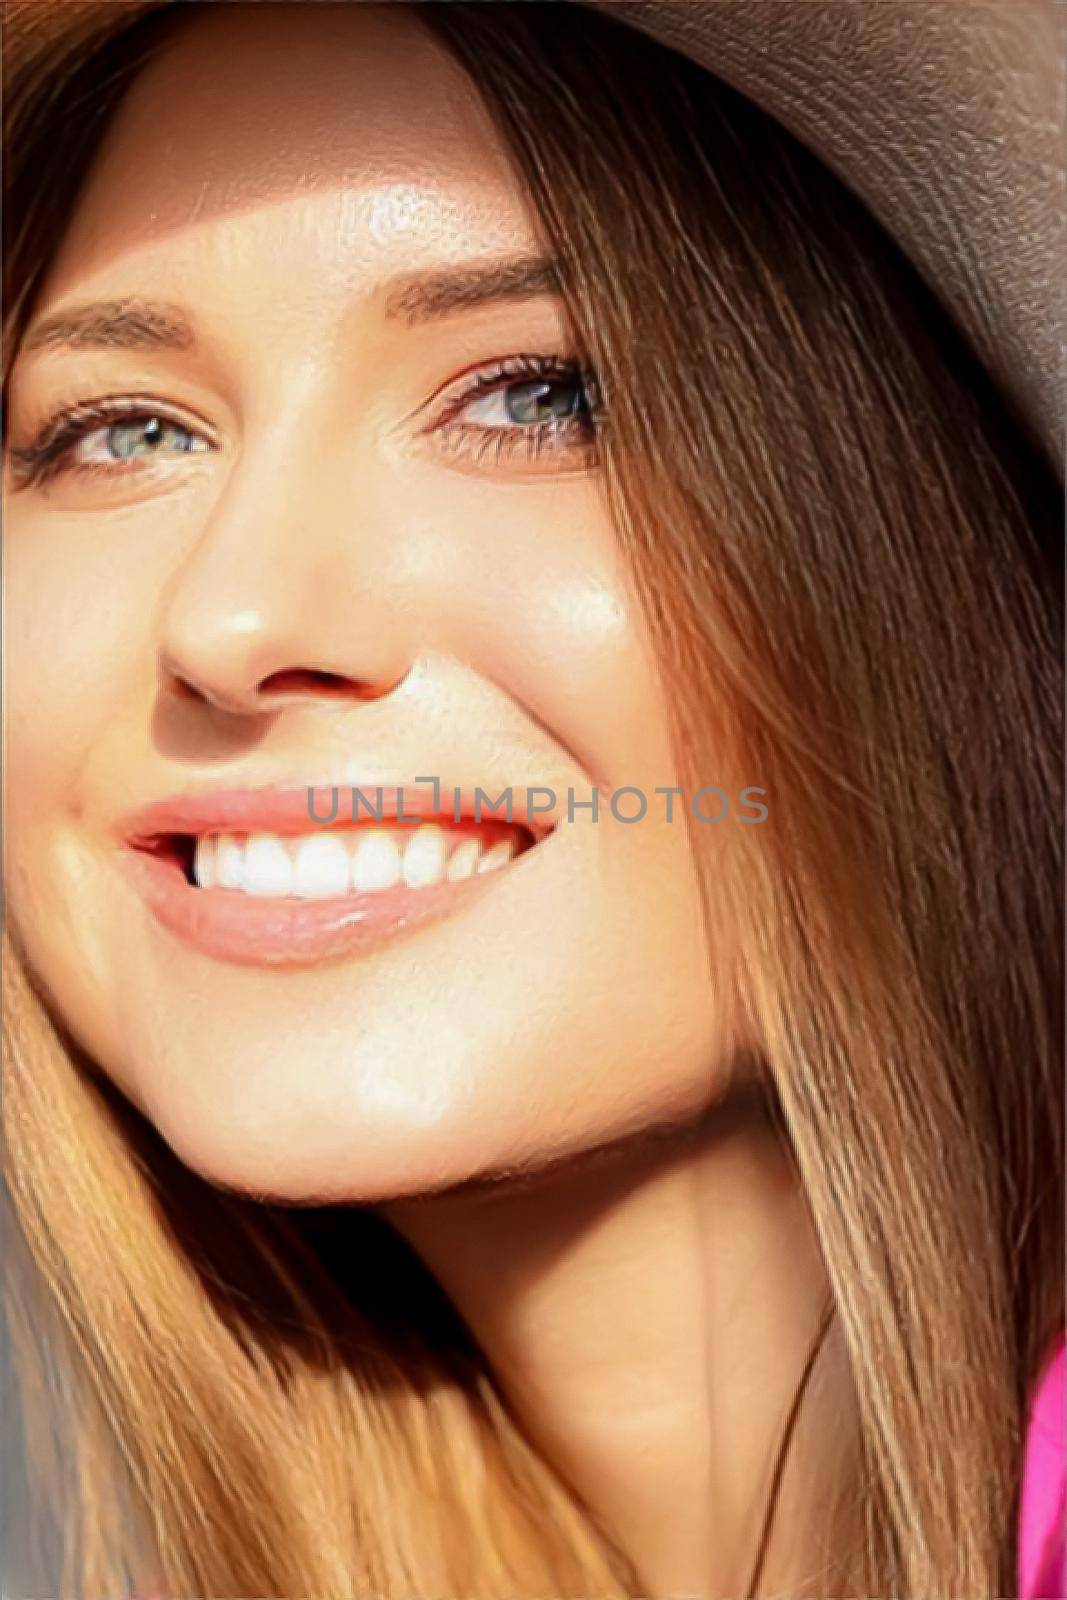 Fashion, travel and beauty face portrait of young woman, happy smiling model wearing beach sun hat in summer, head accessory and style concept